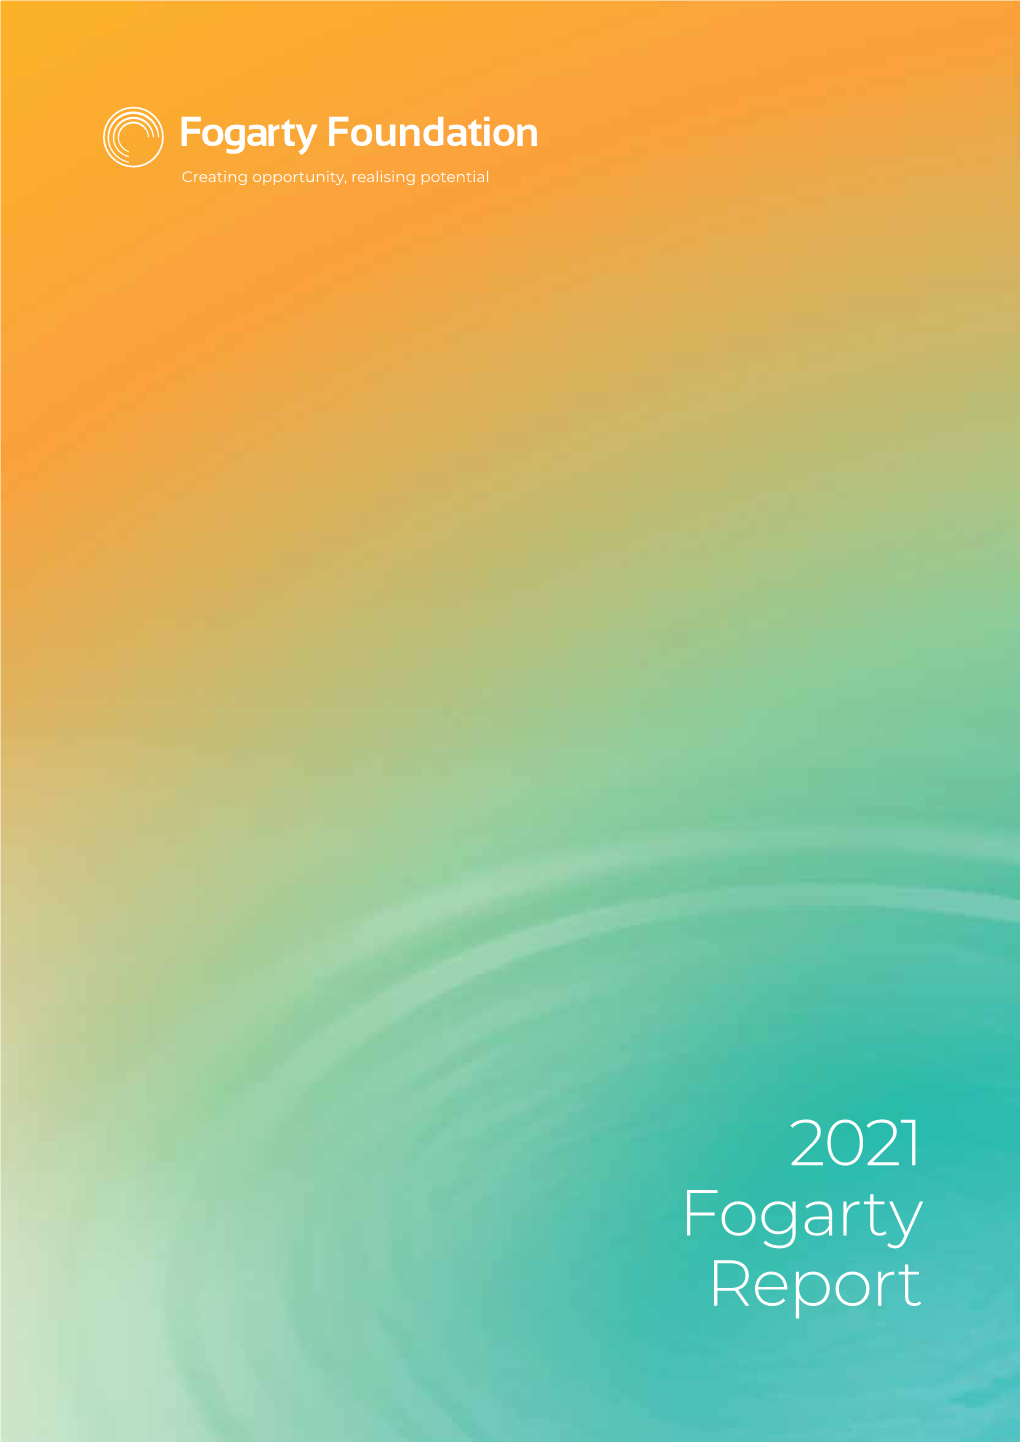 2021 Fogarty Report the Fogarty Foundation Is a Social Venturer, Advancing Change Through Education